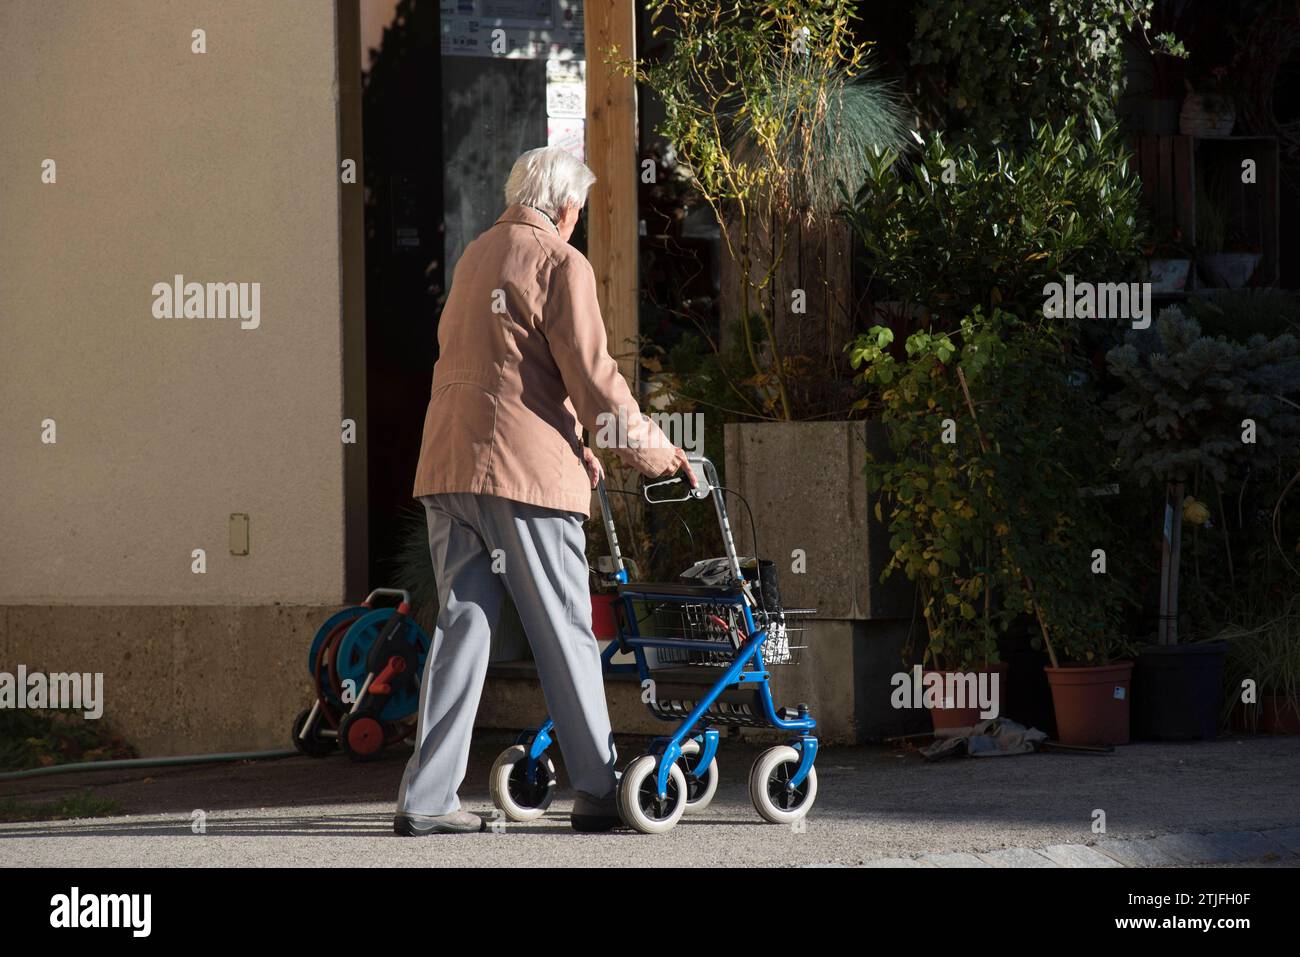 mobility of older people and senior citizens in everyday life mobility of older people in everyday life Stock Photo